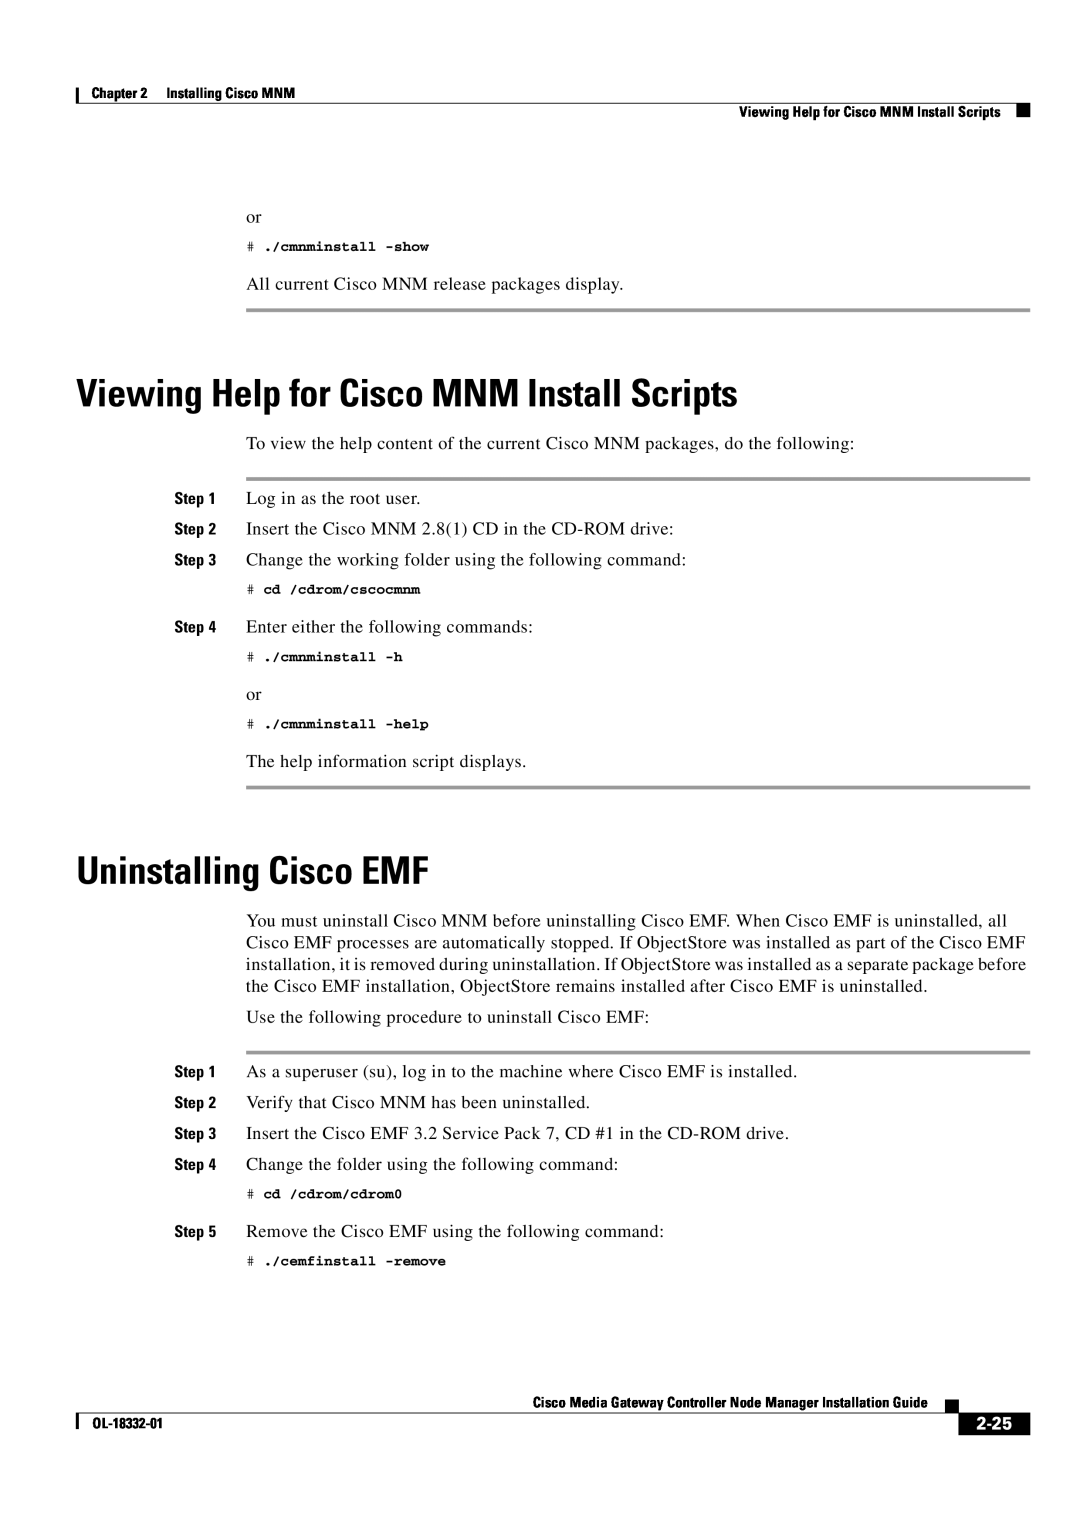 Cisco Systems Media Gateway Controller Node Manager Viewing Help for Cisco MNM Install Scripts, Uninstalling Cisco EMF 